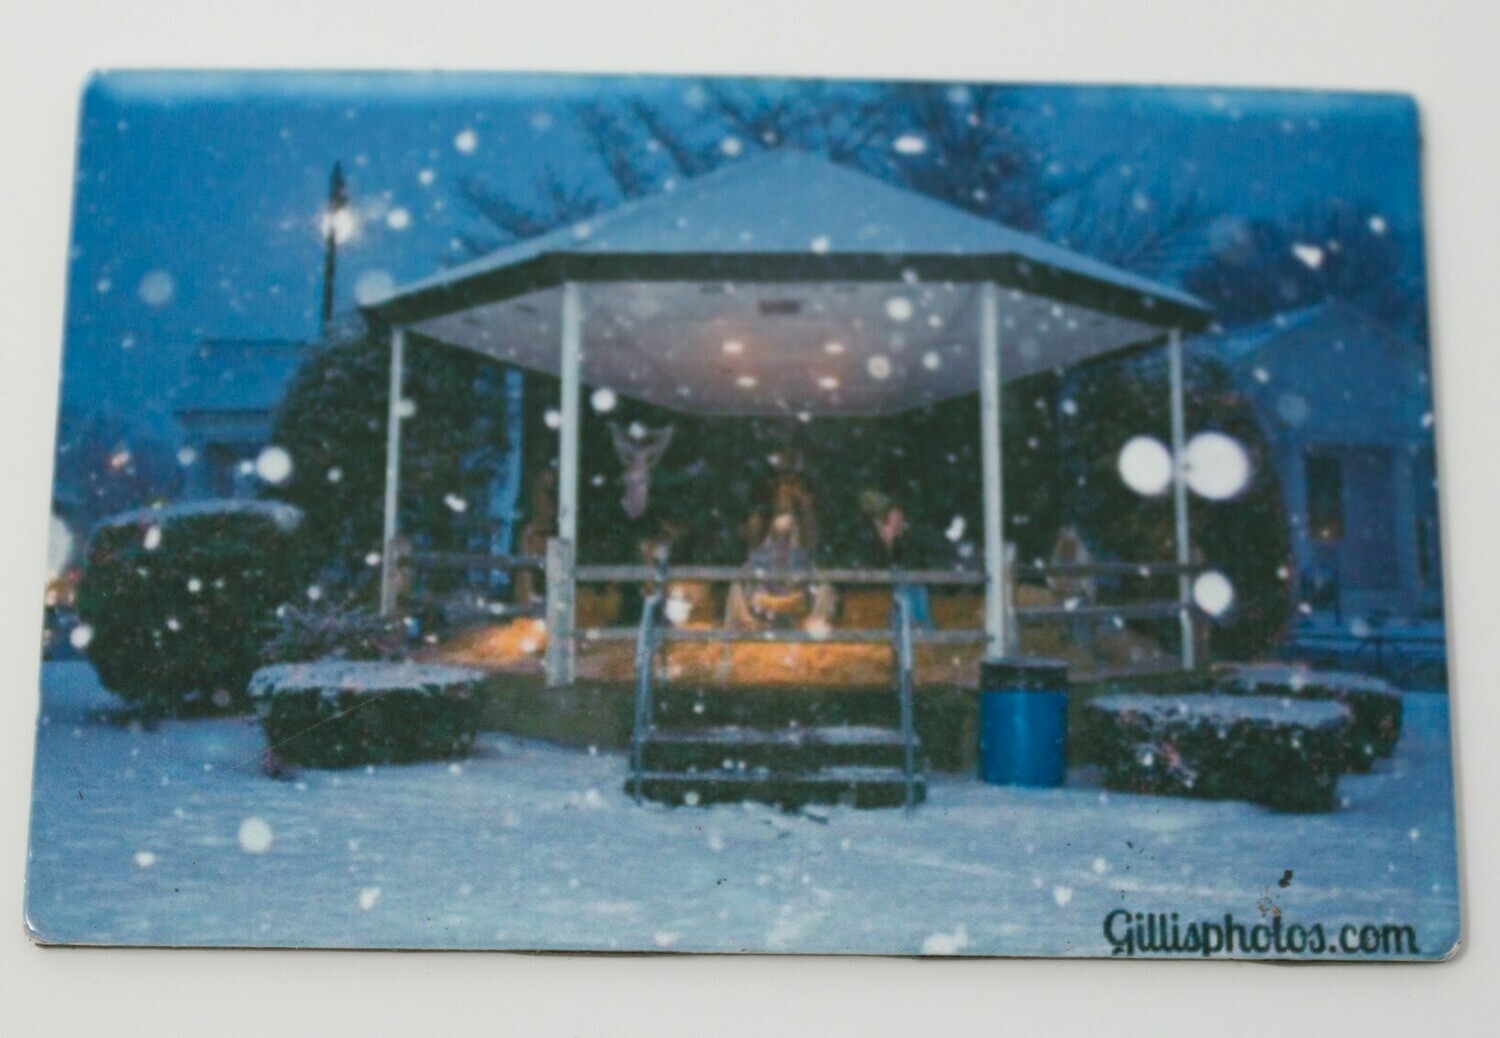 2"x 3" Photo Magnet With Image of The Foxboro Nativity Scene in the Snow​